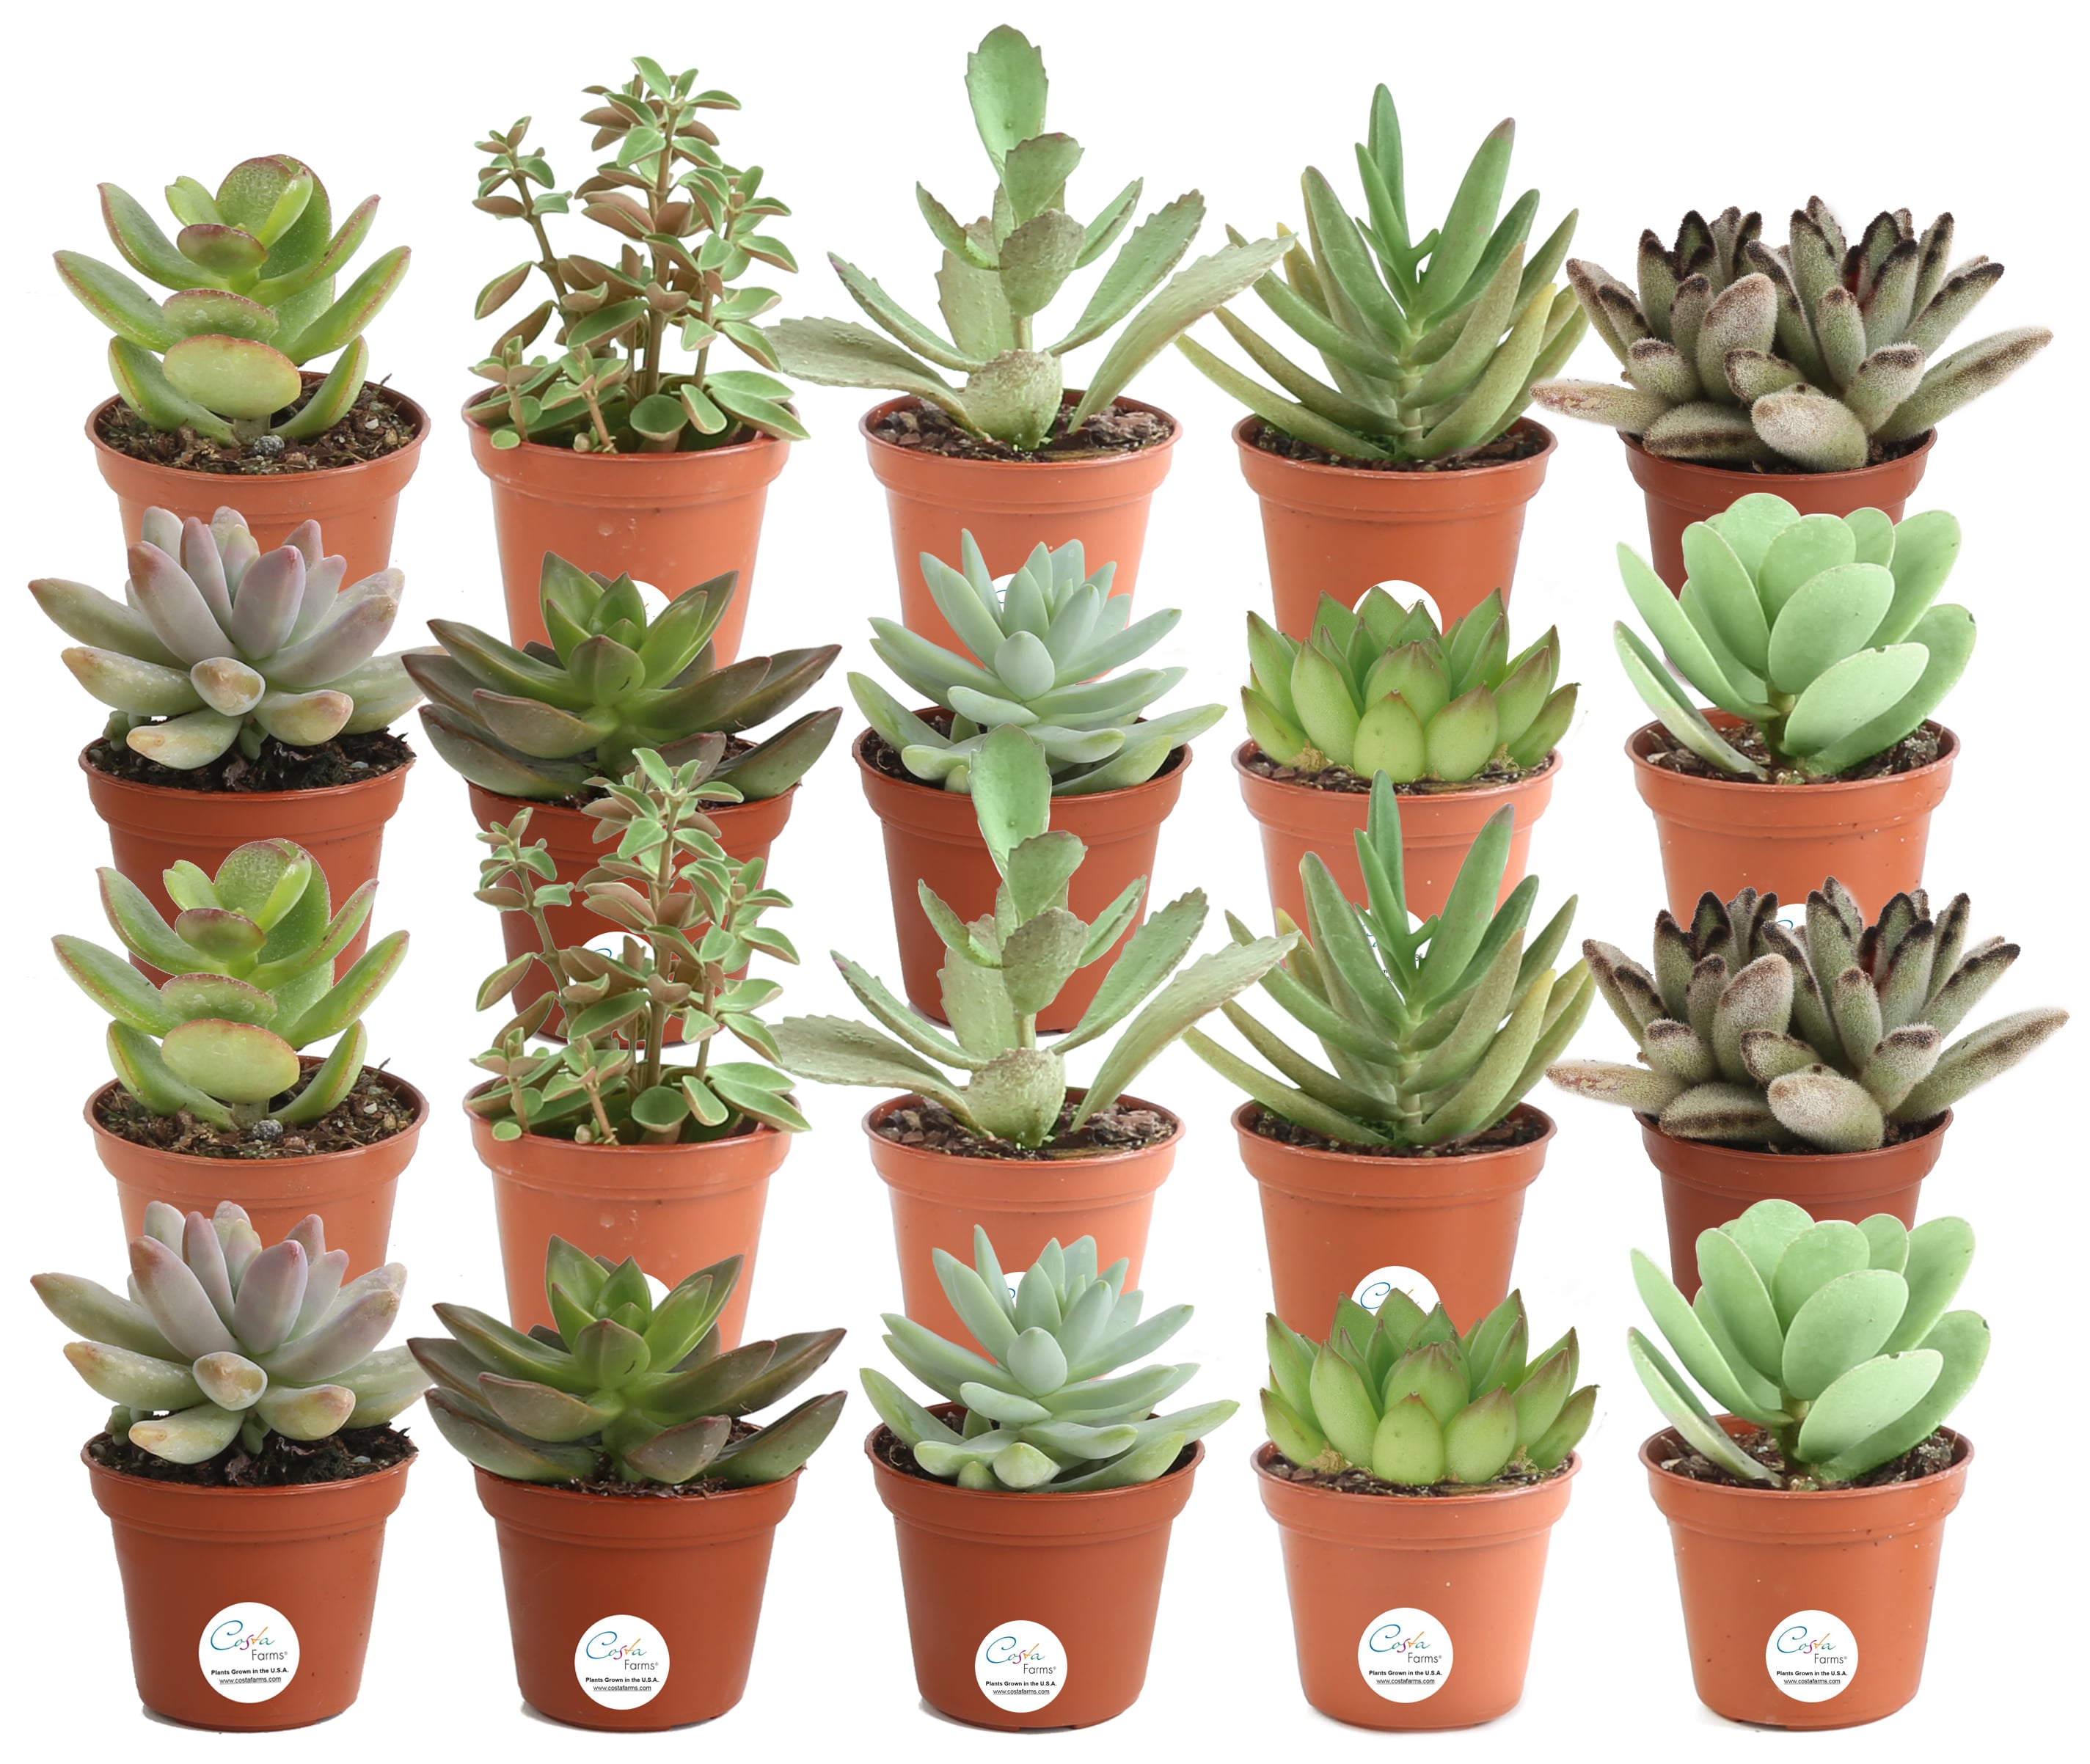 Succulents 2 Mini Terracotta Pot & String of Succulent Varieties Perfect for Small Cuttings